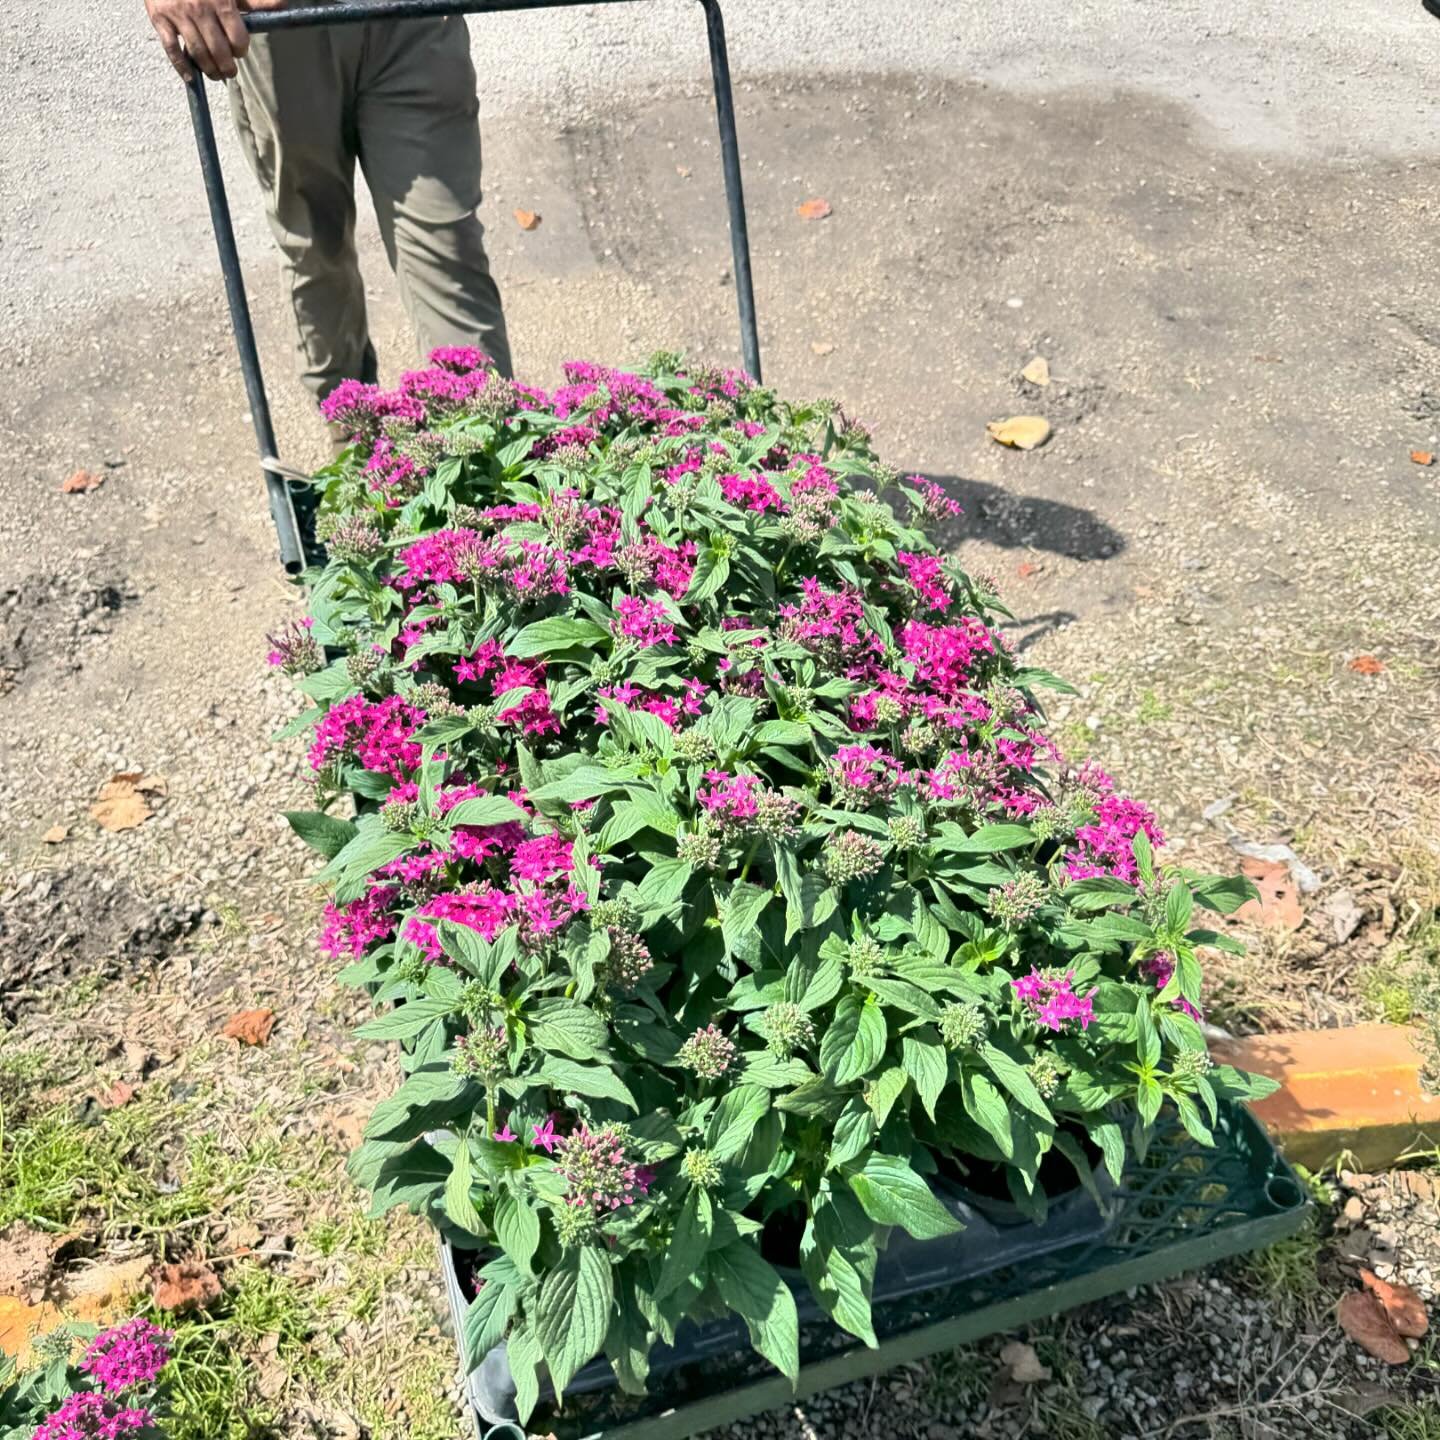 Thank you John Leserra at @leserranursery for your donation of 40+ beautiful lantana and penta plants!!! This gorgeous surprise showed up at the front gate this morning and will be perfect for our upcoming Creative Arts Night: Enchanting Garden event